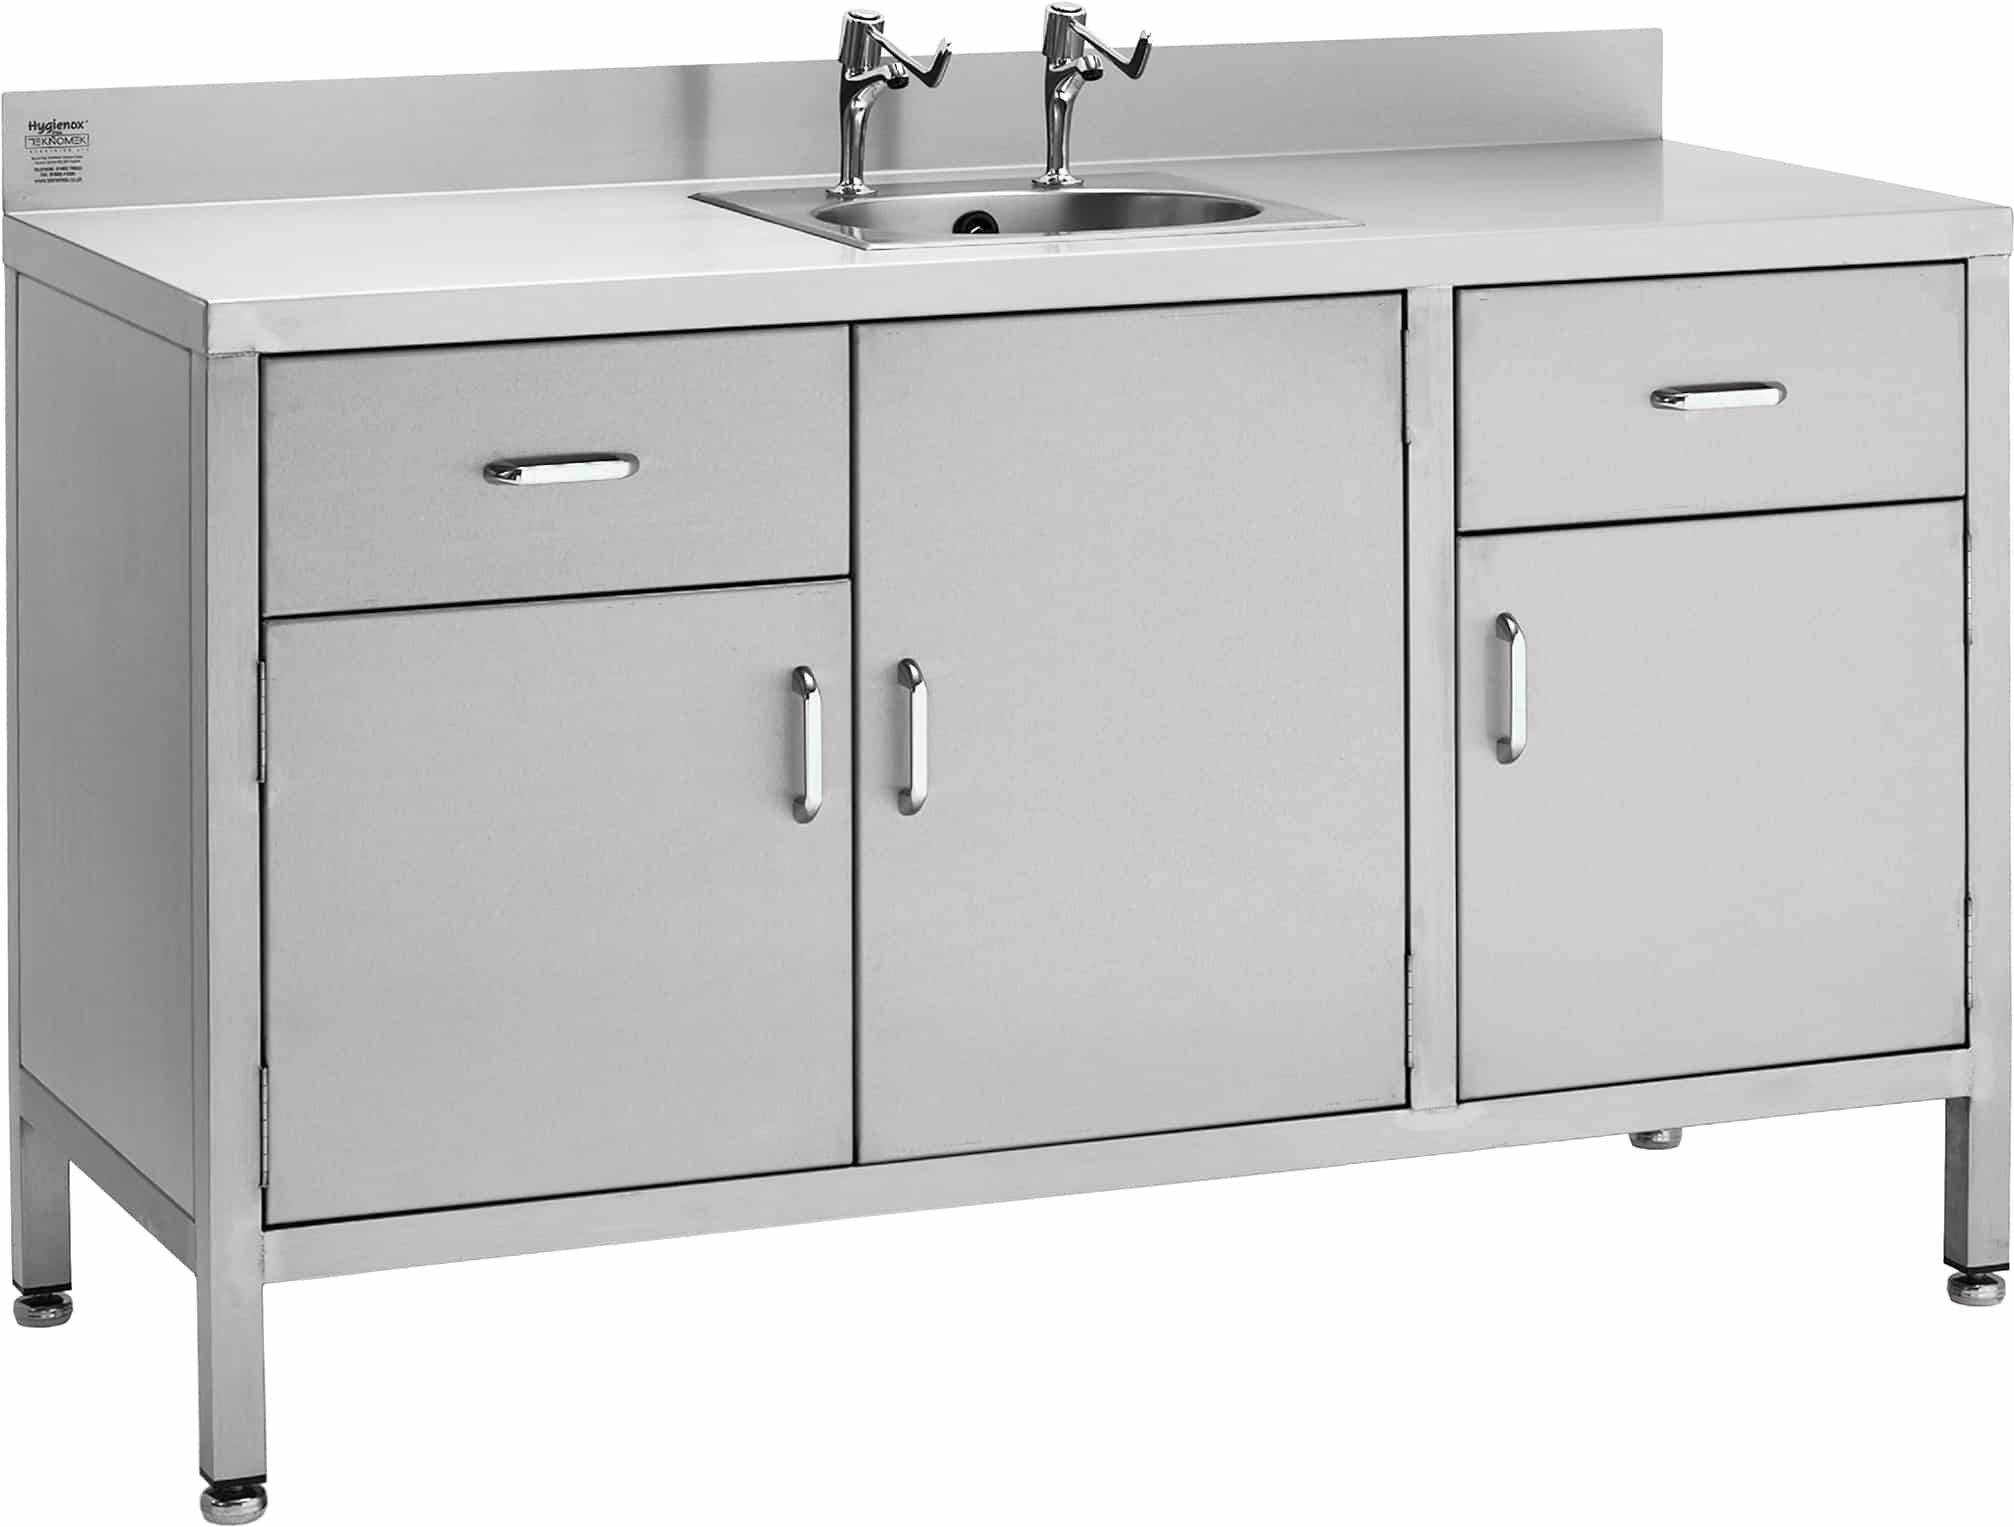 Stainless steel sink with double cupboard and 2 drawers